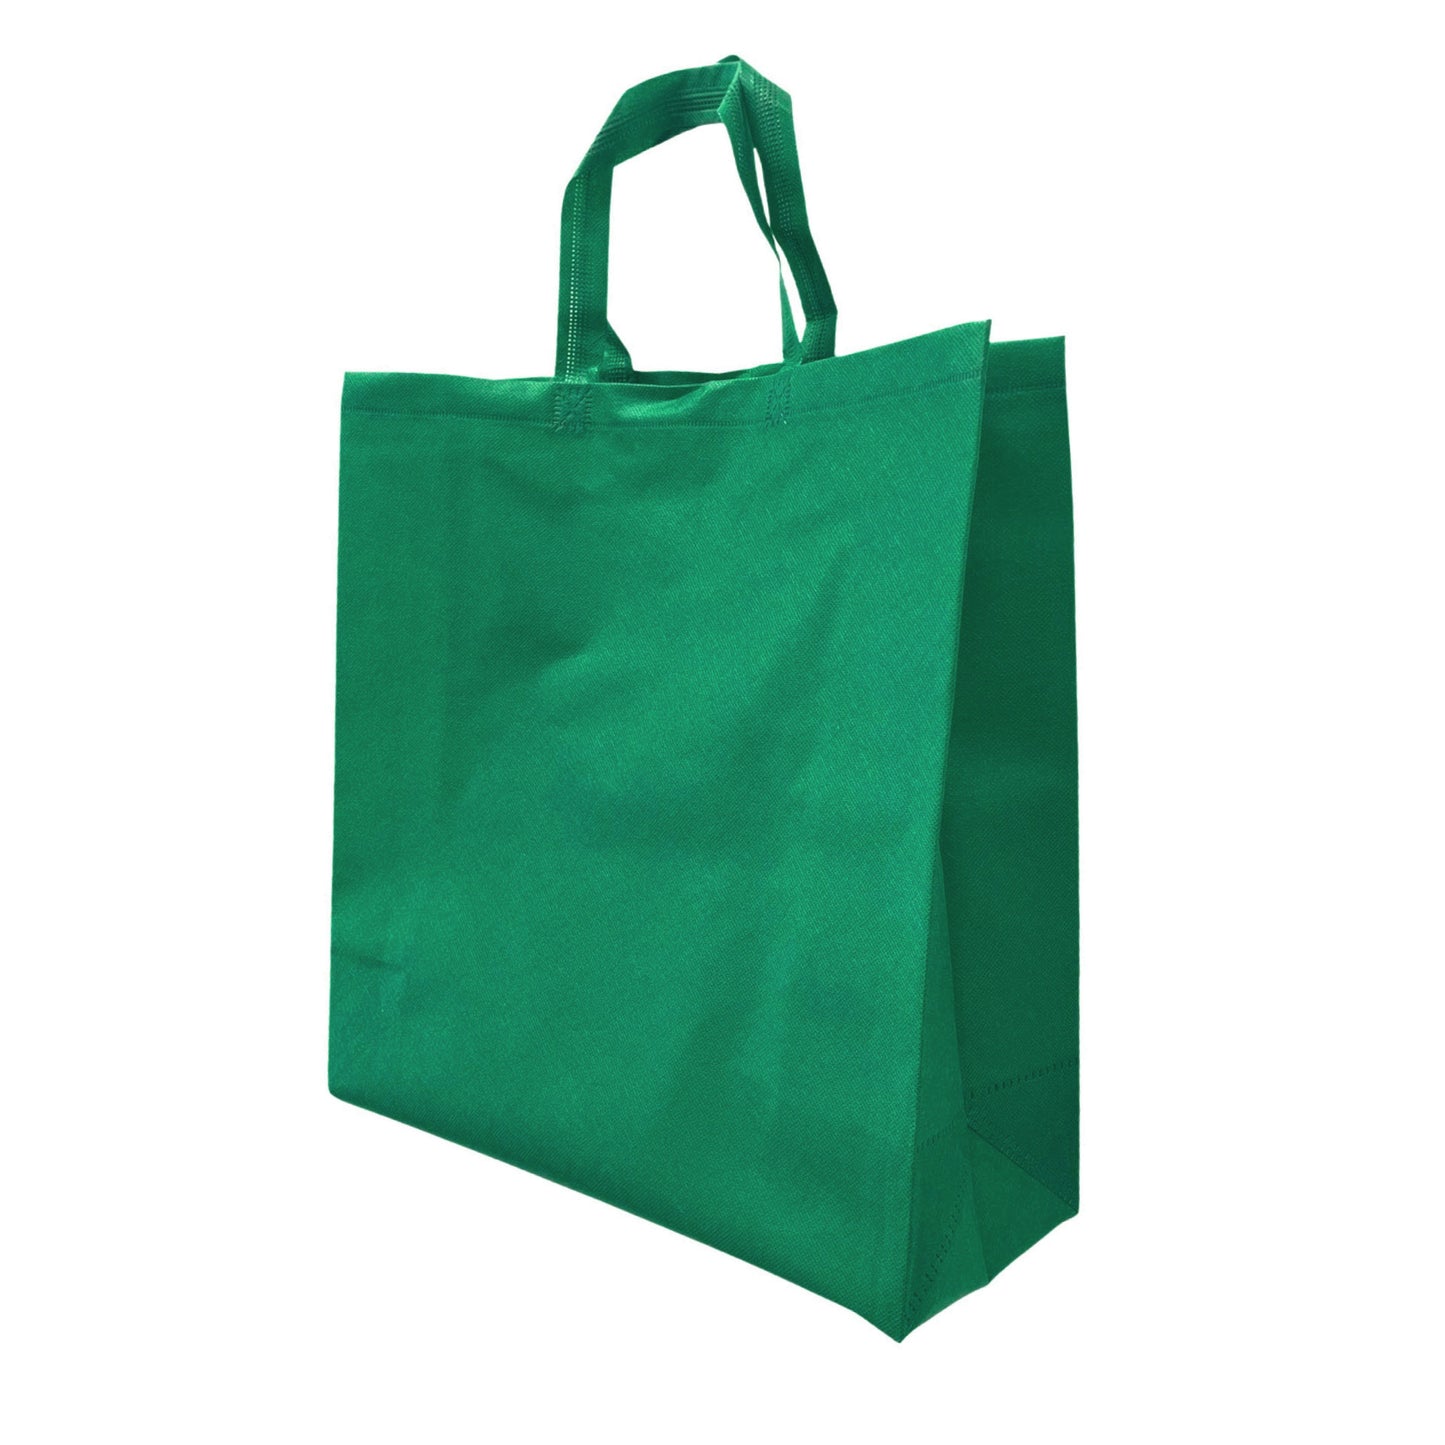 200pcs, Grocer, 15.5x6x15.5 inches, Dark Green Non-Woven Reusable shopping Bags, with Flat handle